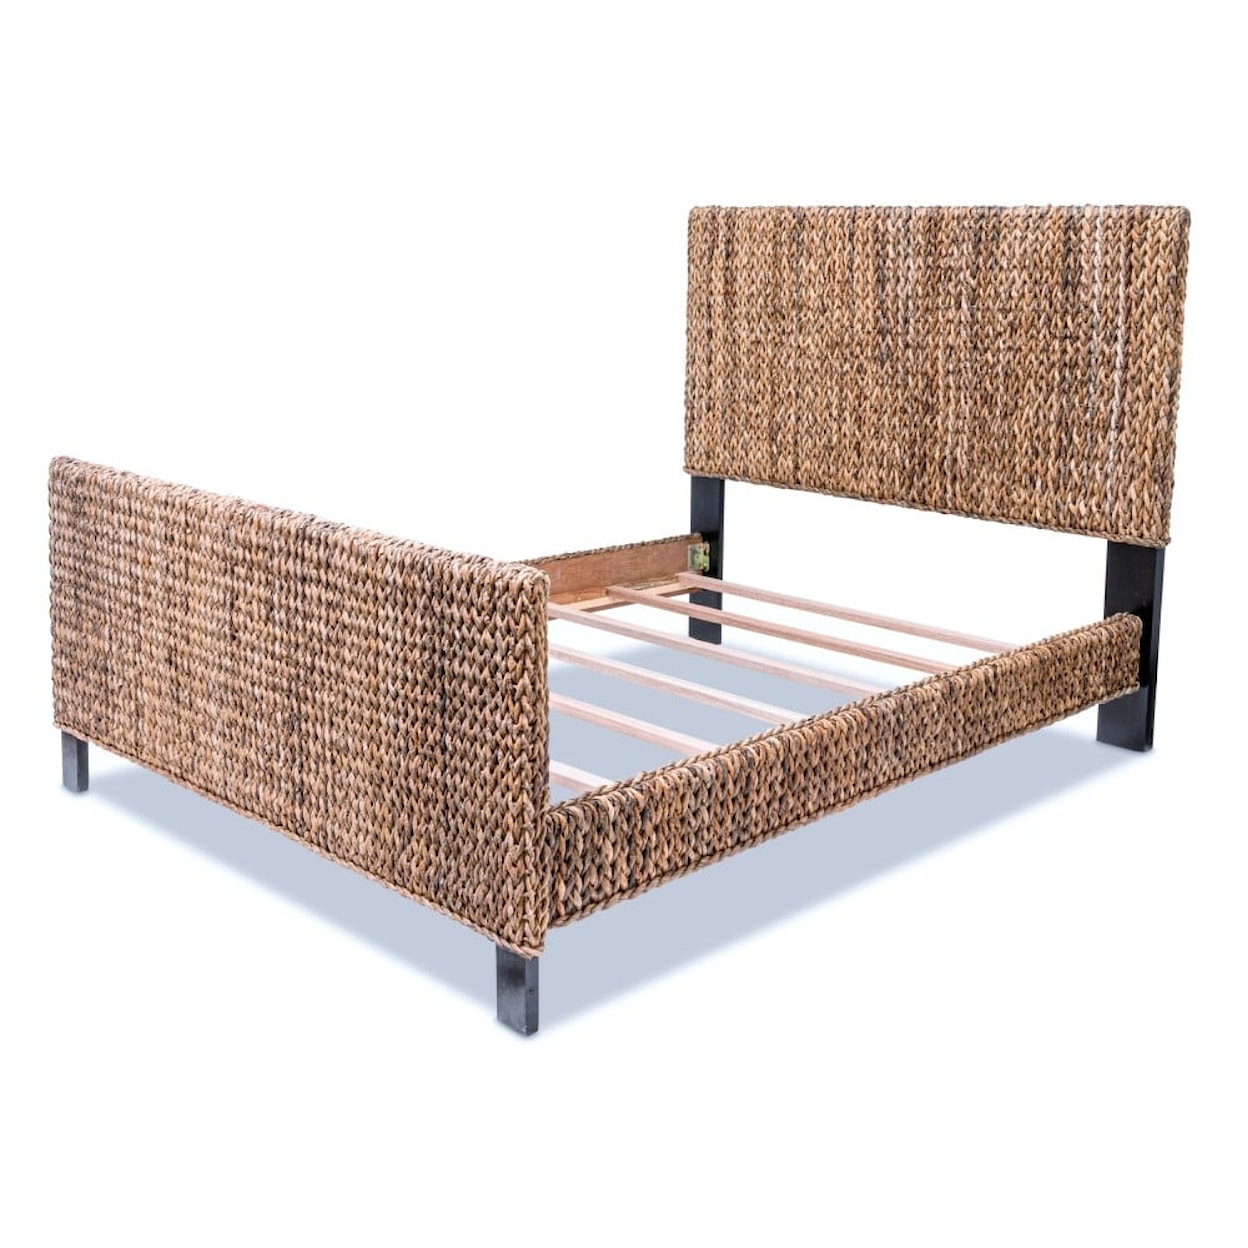 Sea Winds Trading Company Island Breeze Woven Bed - Queen